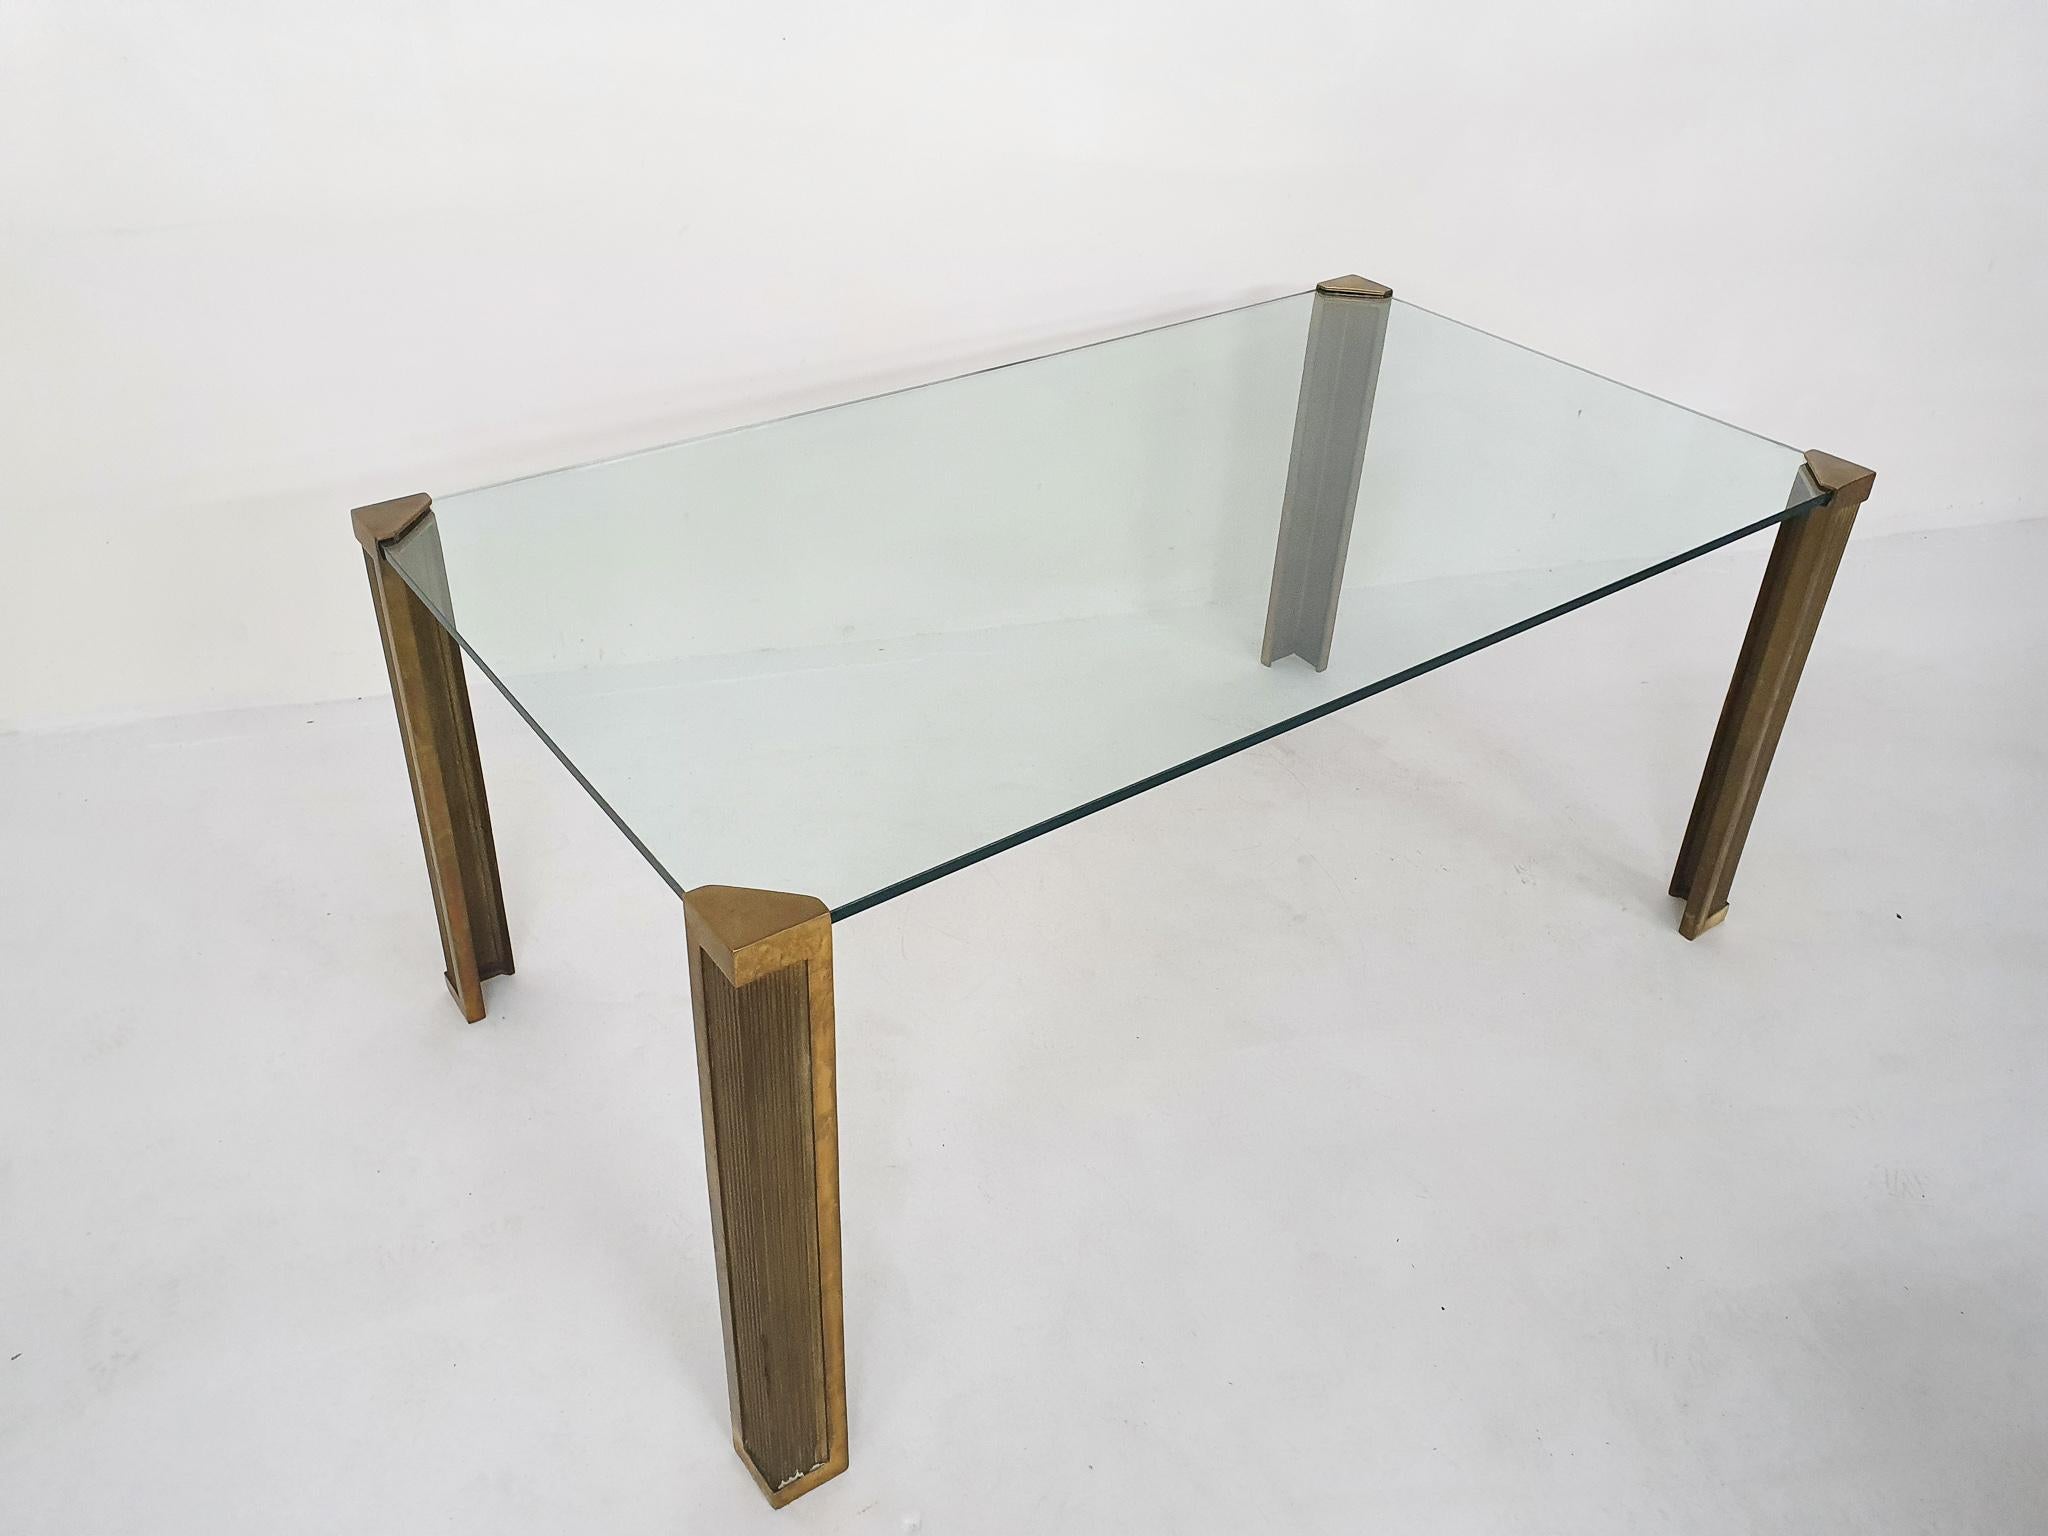 Large T14 glass dining table with four bronze legs. Marked by Ghyczy design.
There is a small chip fromt the corner of the glass, but this is hidden in the leg, so not visible when assembled.

Architect and designer Peter Ghyczy, born in Hungary